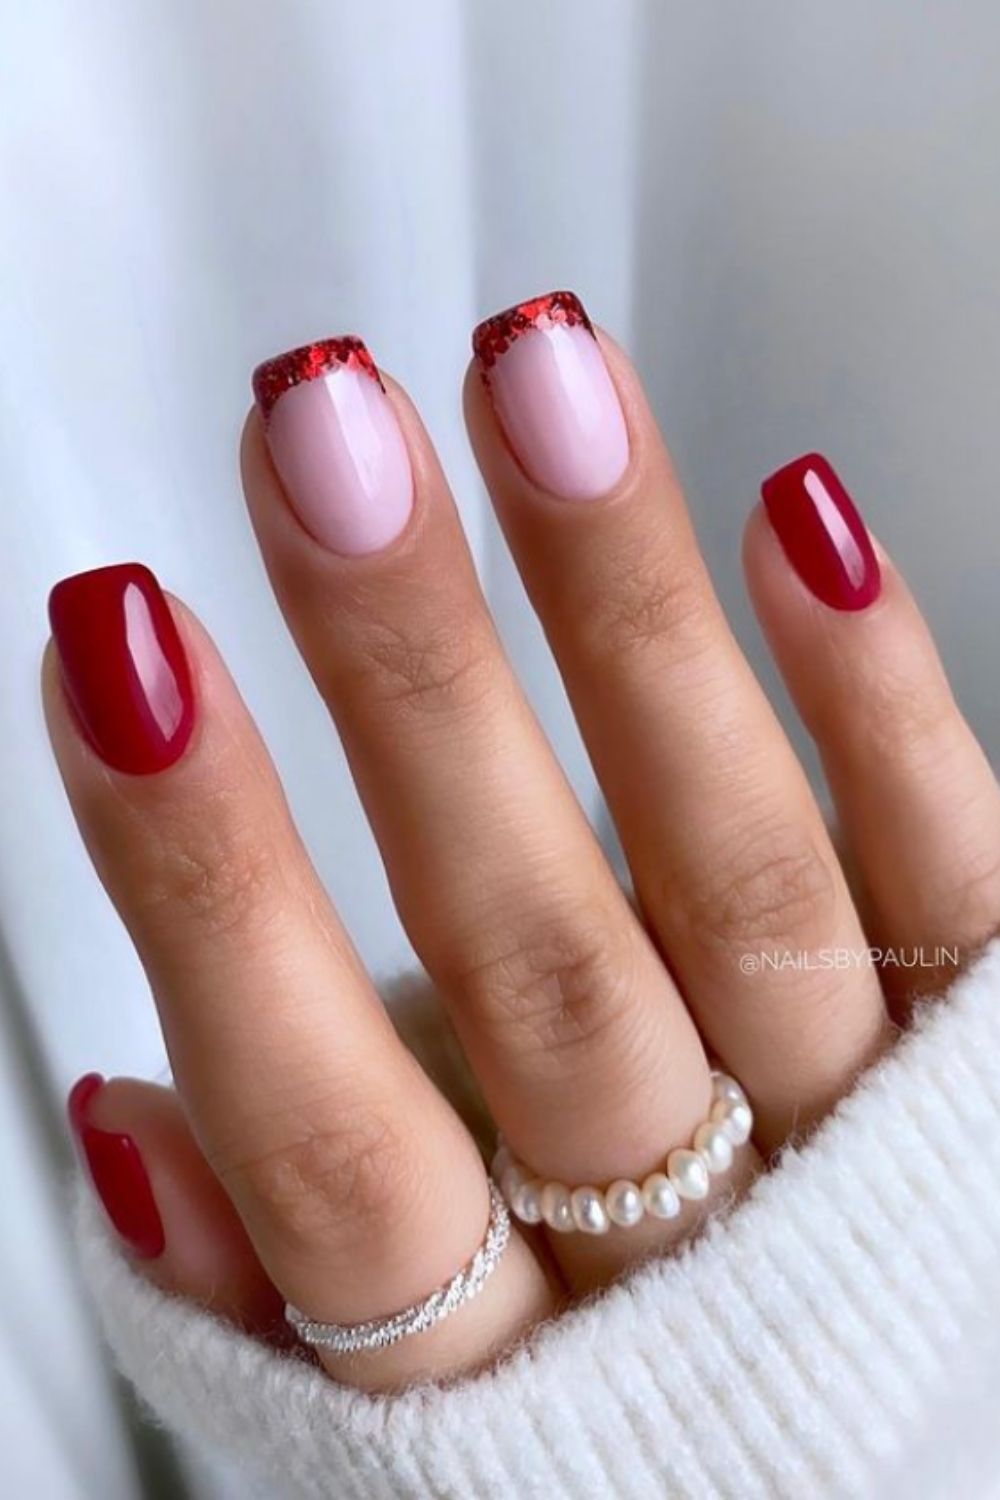 Red tip nails